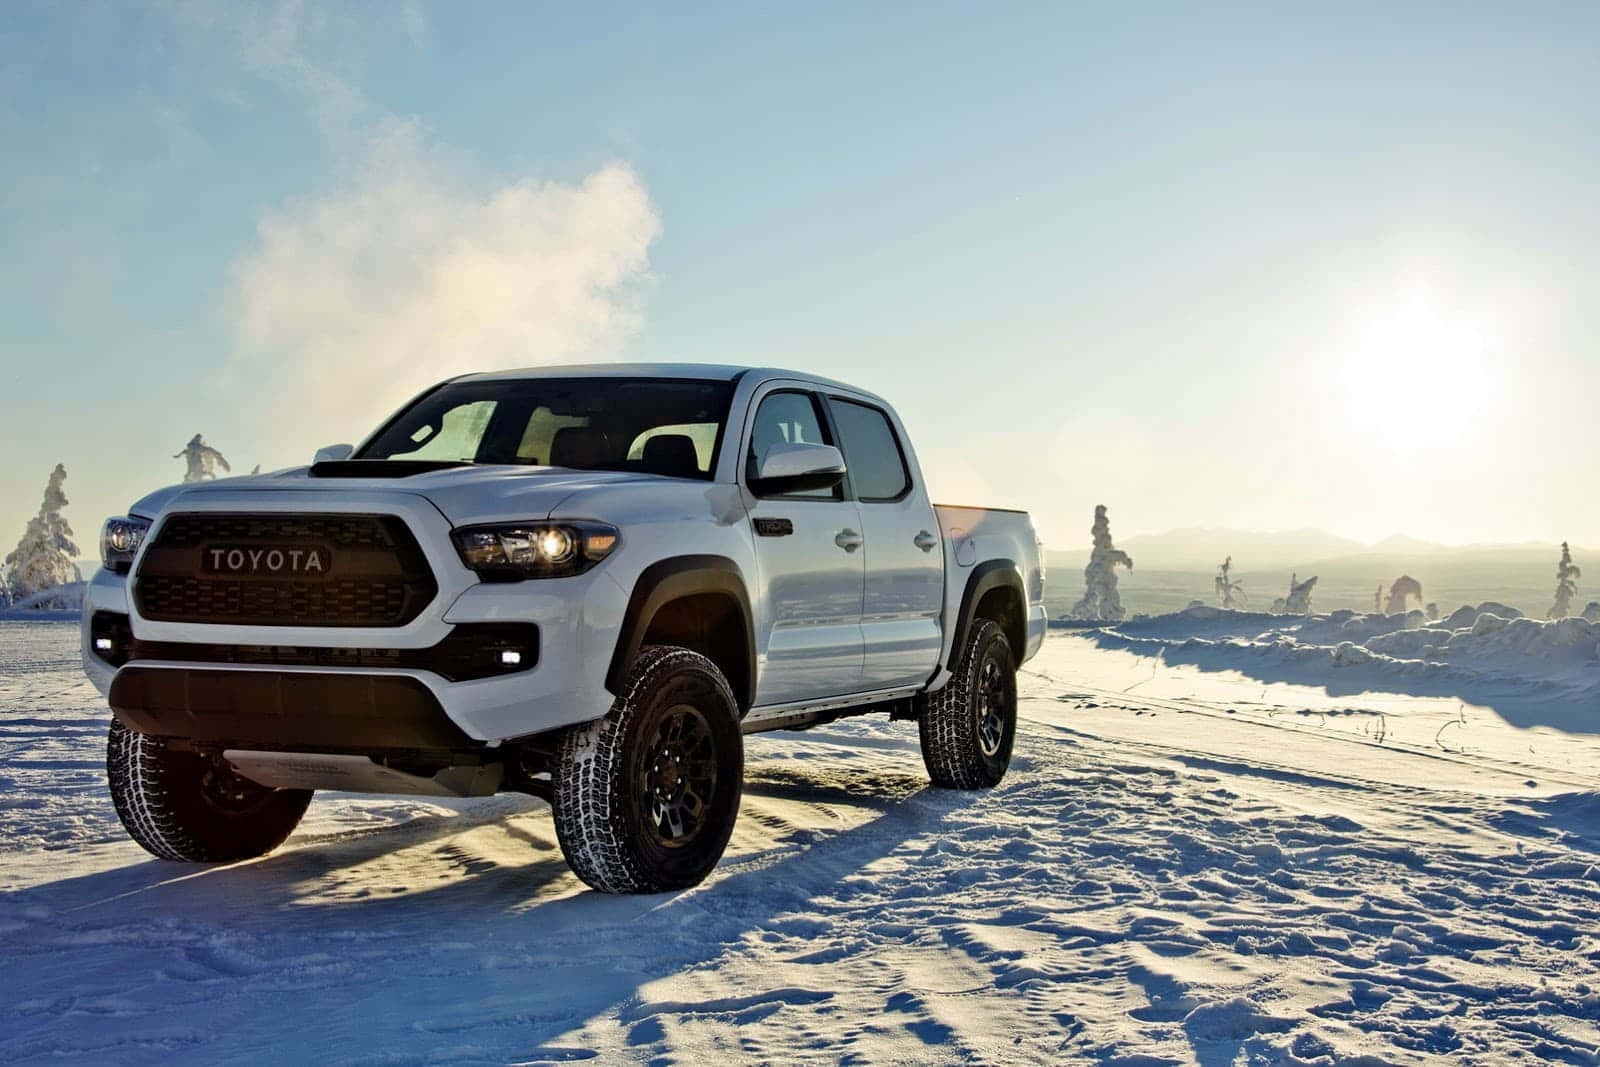 Rugged Off-road Toyota Tacoma In Action Wallpaper